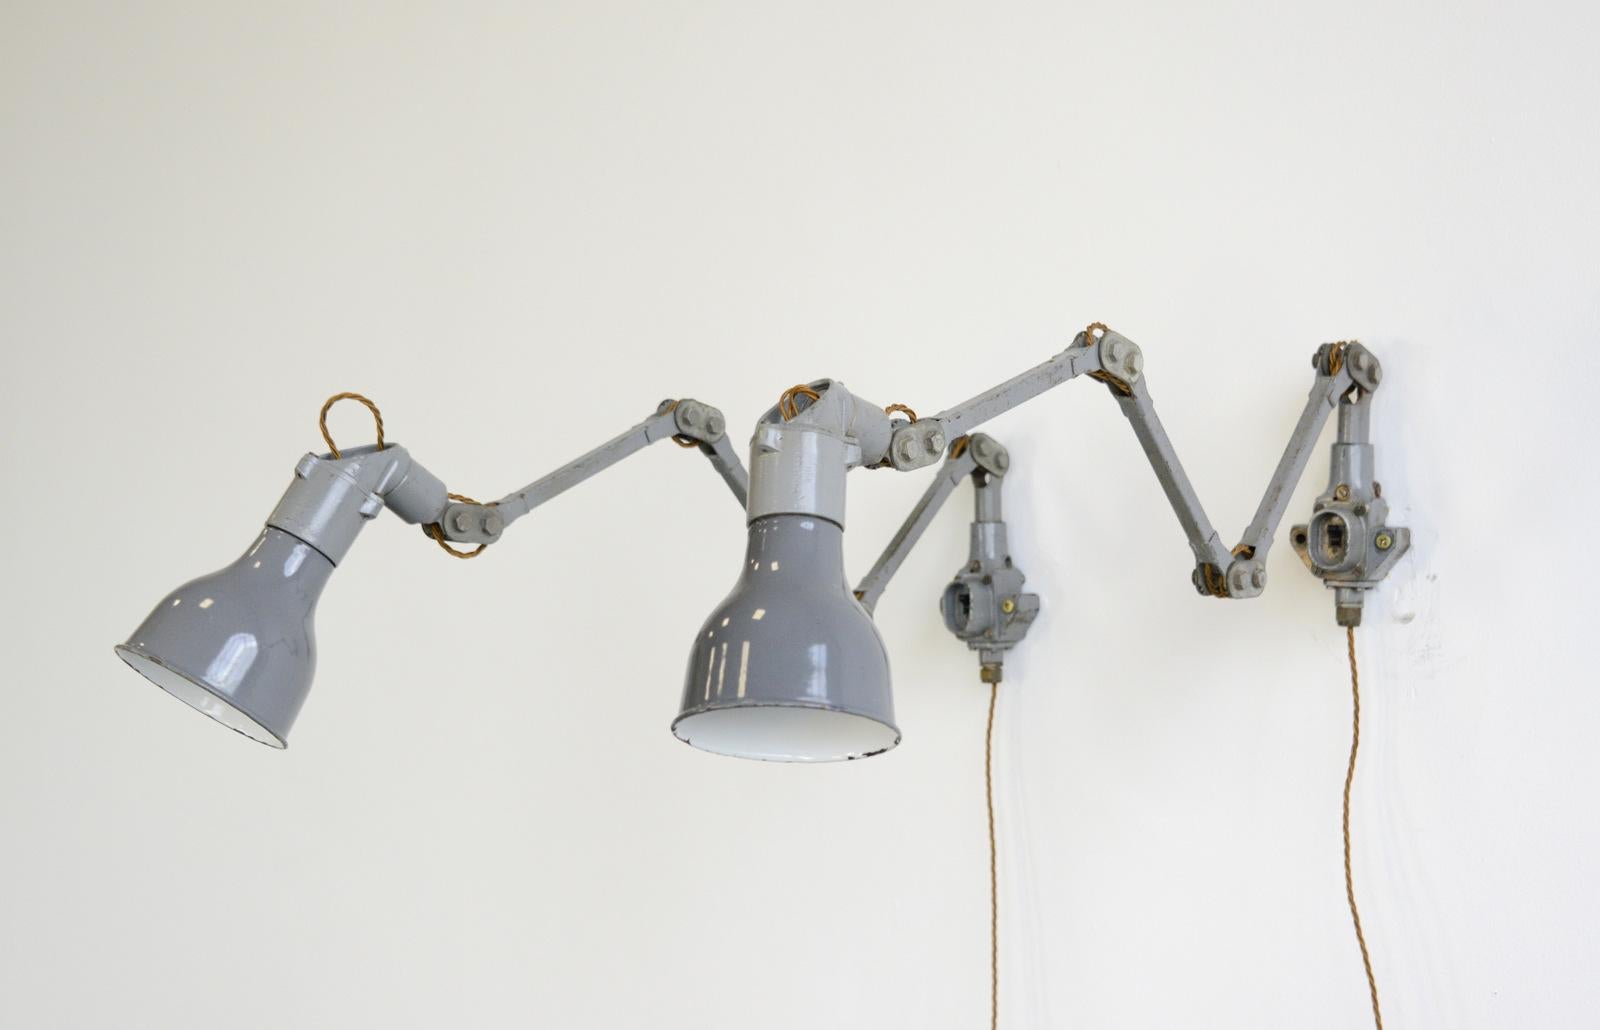 Grey industrial task lamps by Mek Elek, circa 1950s

- Price is per lamp
- Vitreous grey enamel shades
- Articulated steel arms
- Original on/off switch on the base
- Takes B22 fitting bulbs
- Made by Mek Elek, London
- English, 1950s
-